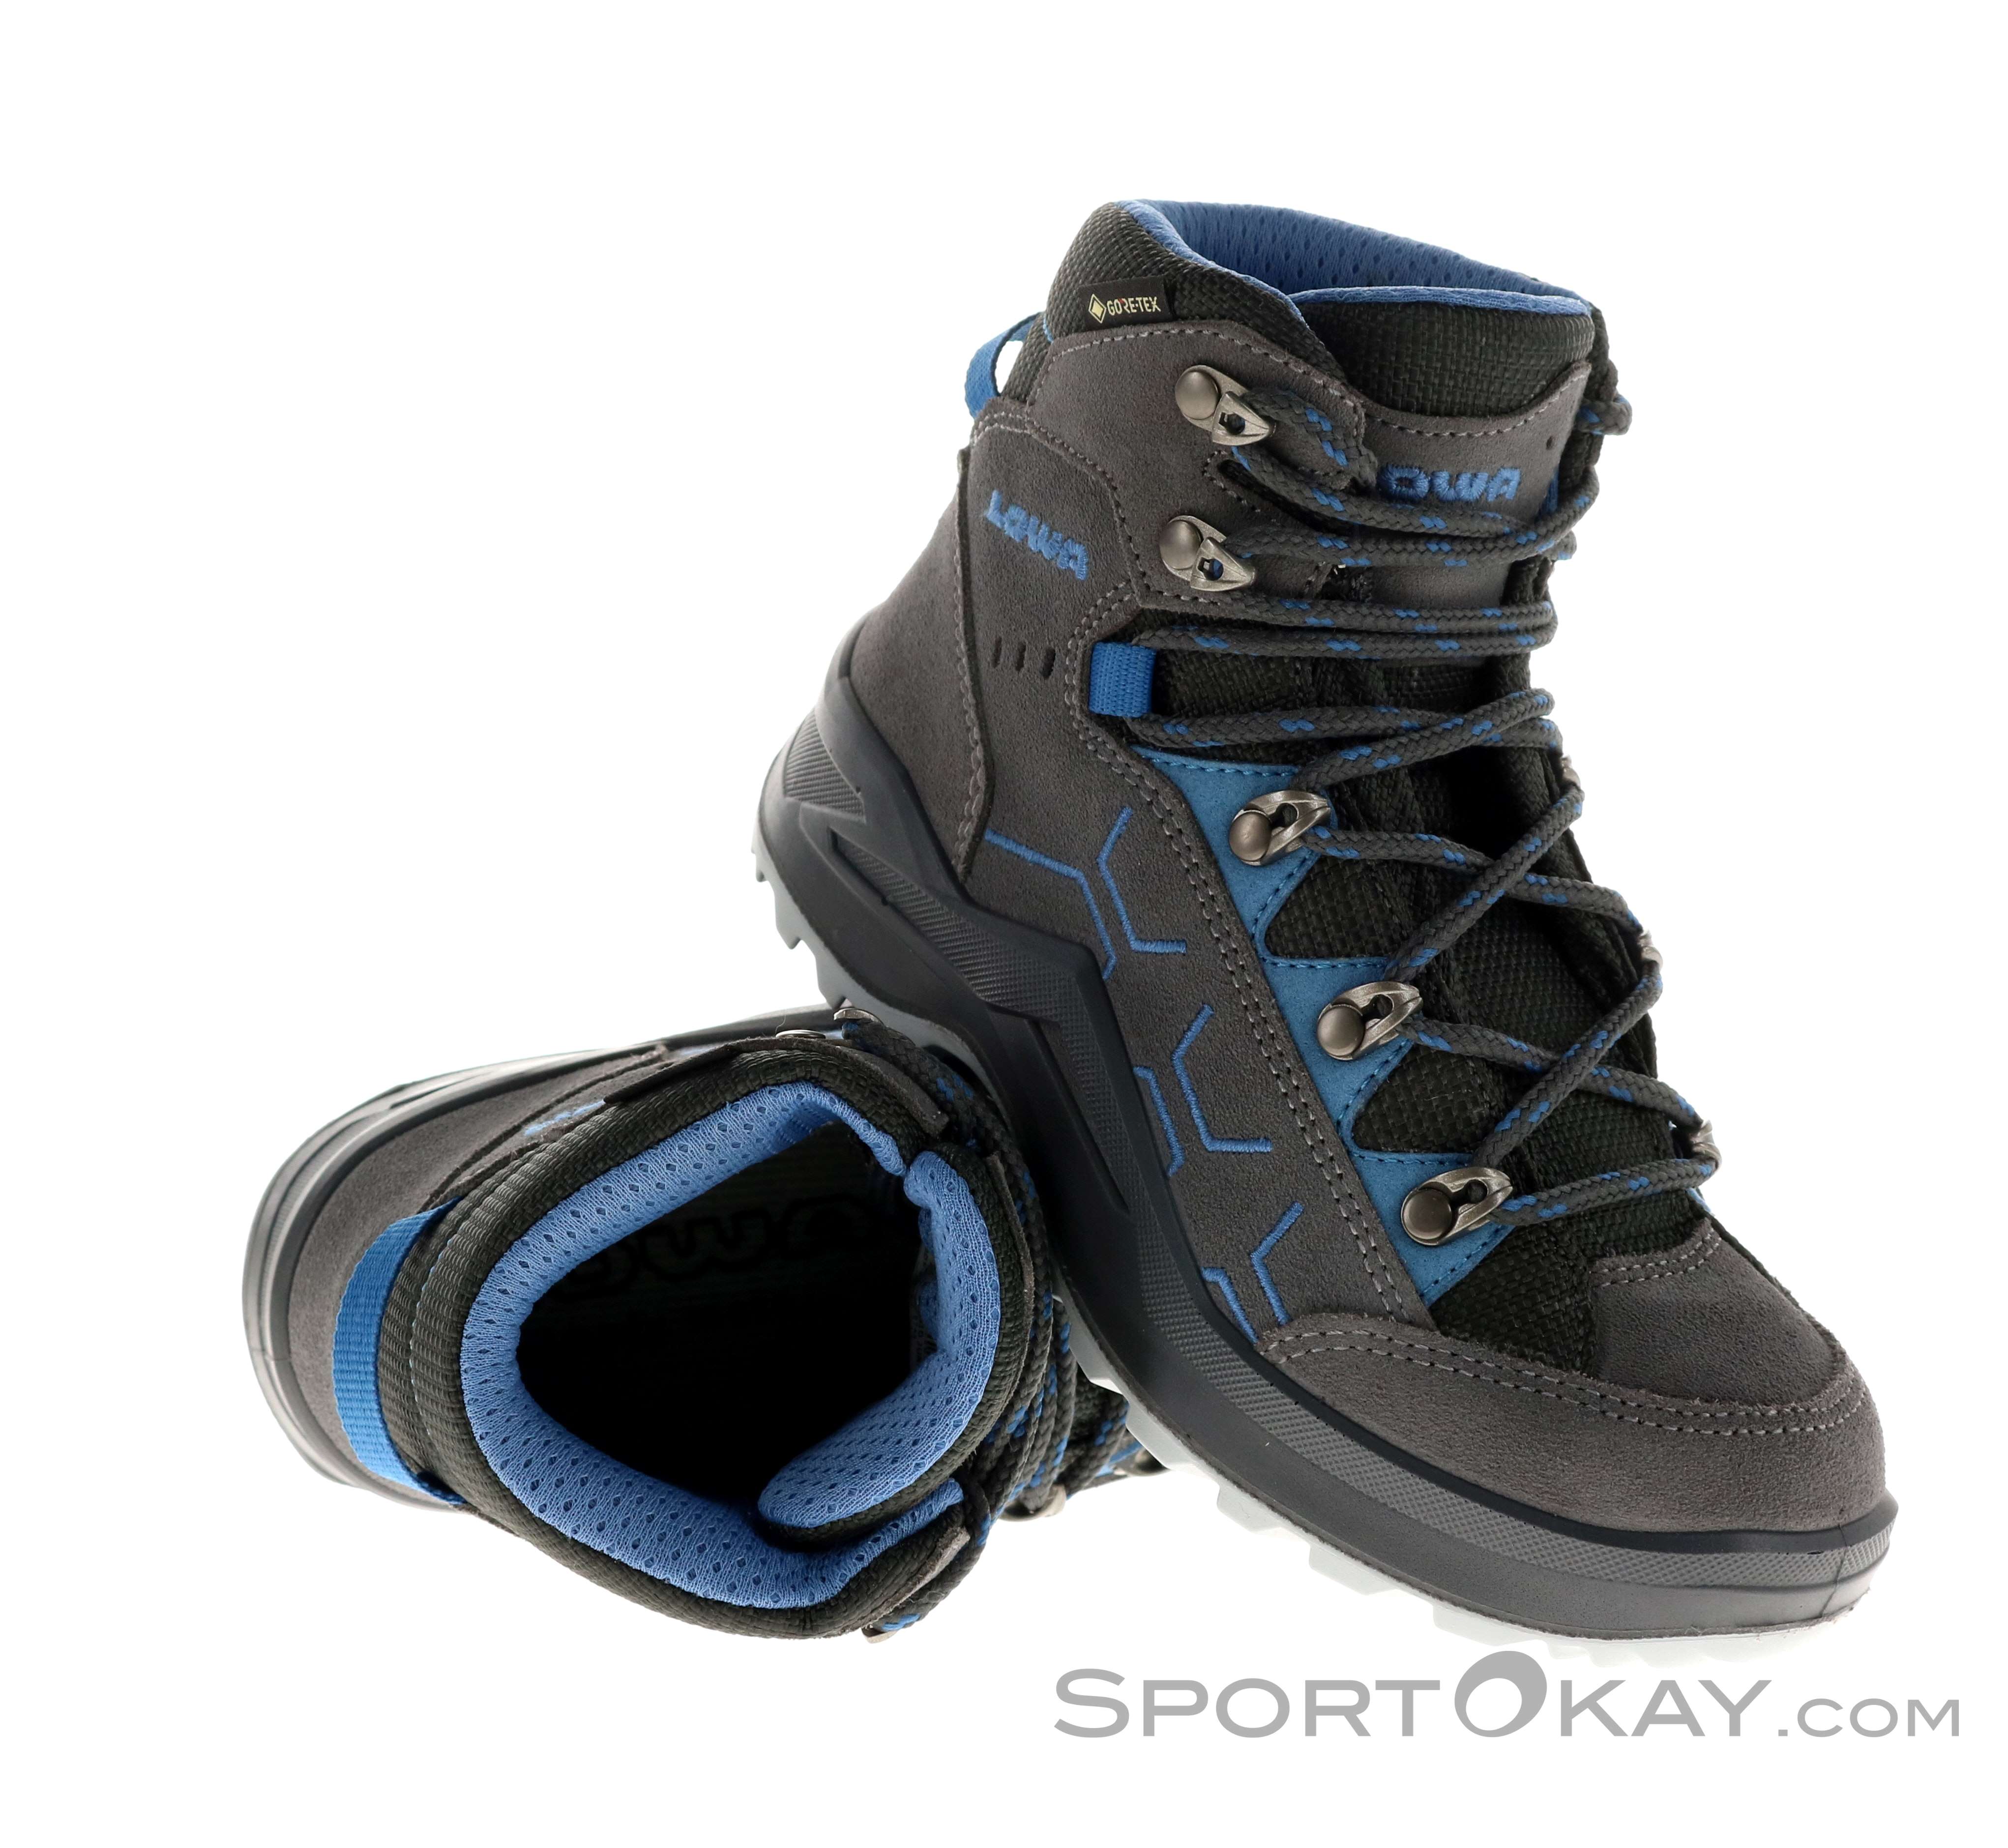 Lowa Kody Mid GTX Hiking Boots - Hiking Boots - Shoes & Poles - Outdoor - All